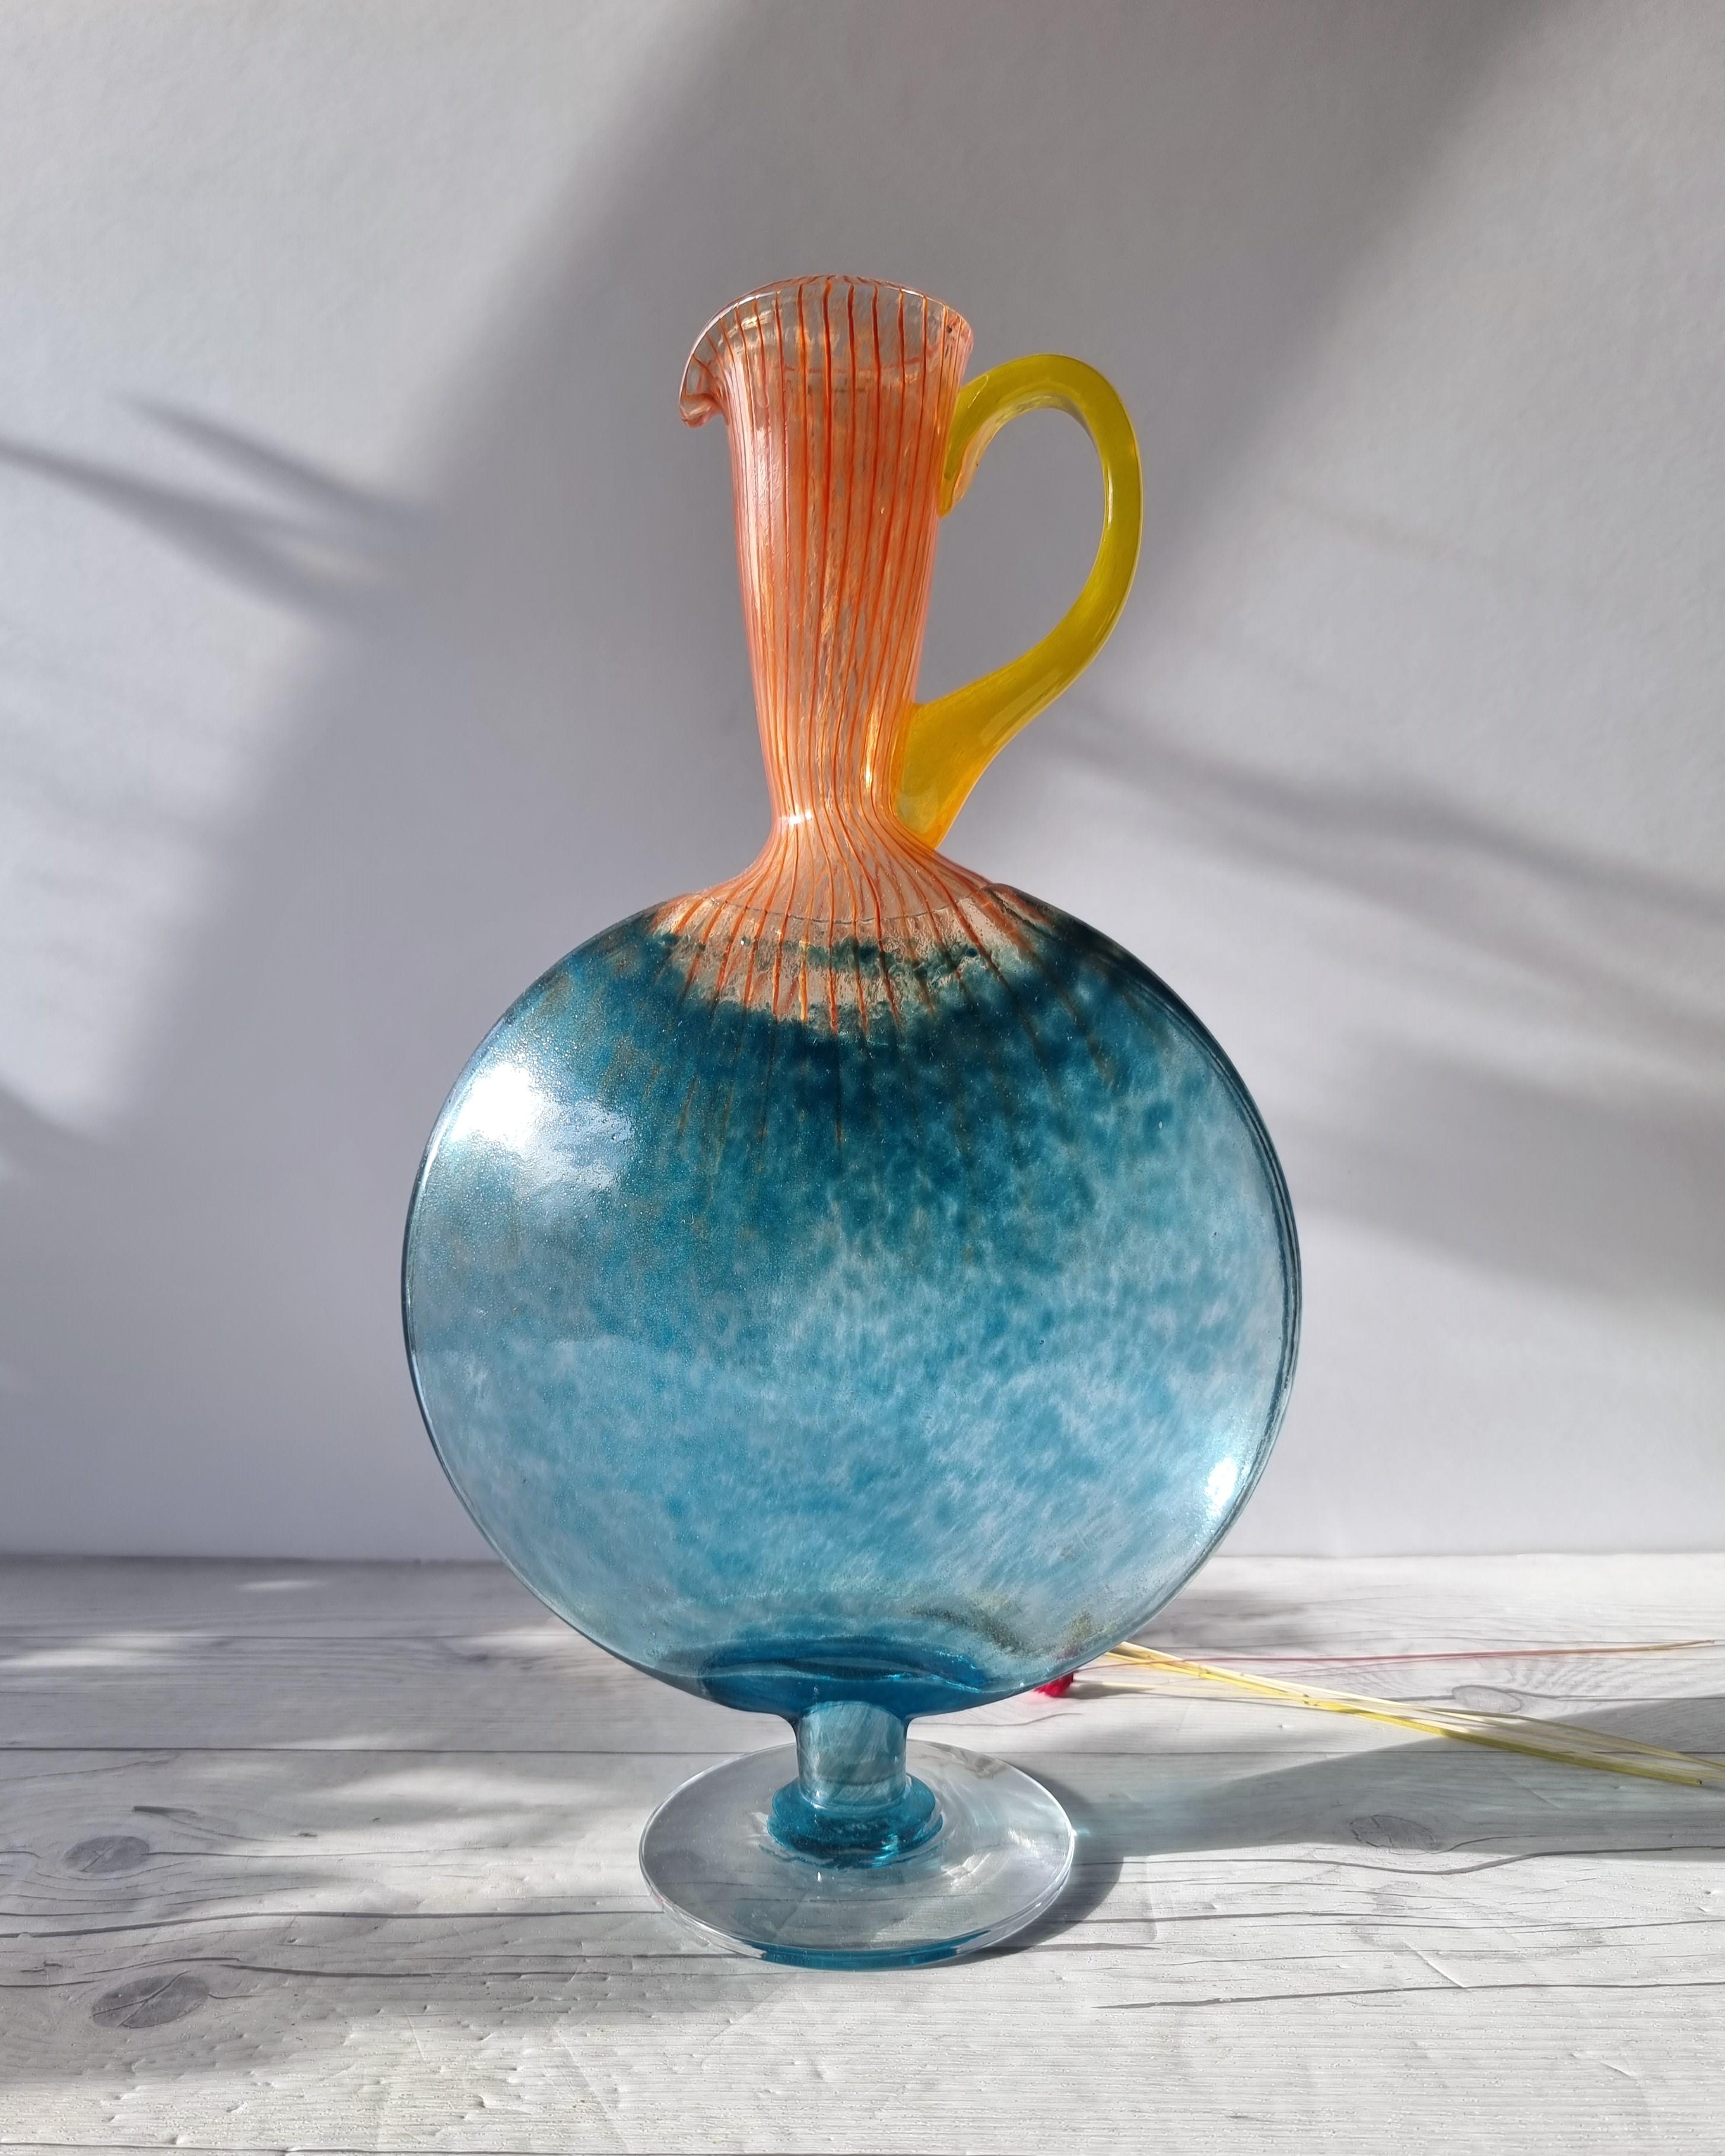 This delicious handblown work of Post Modern art glass is by leading Swedish glass artist Kjell Engman (b. 1946 -), accoladed with the name 'Glass Wizard' for his unlimited imagination with art glass.

This piece is from the popular series named